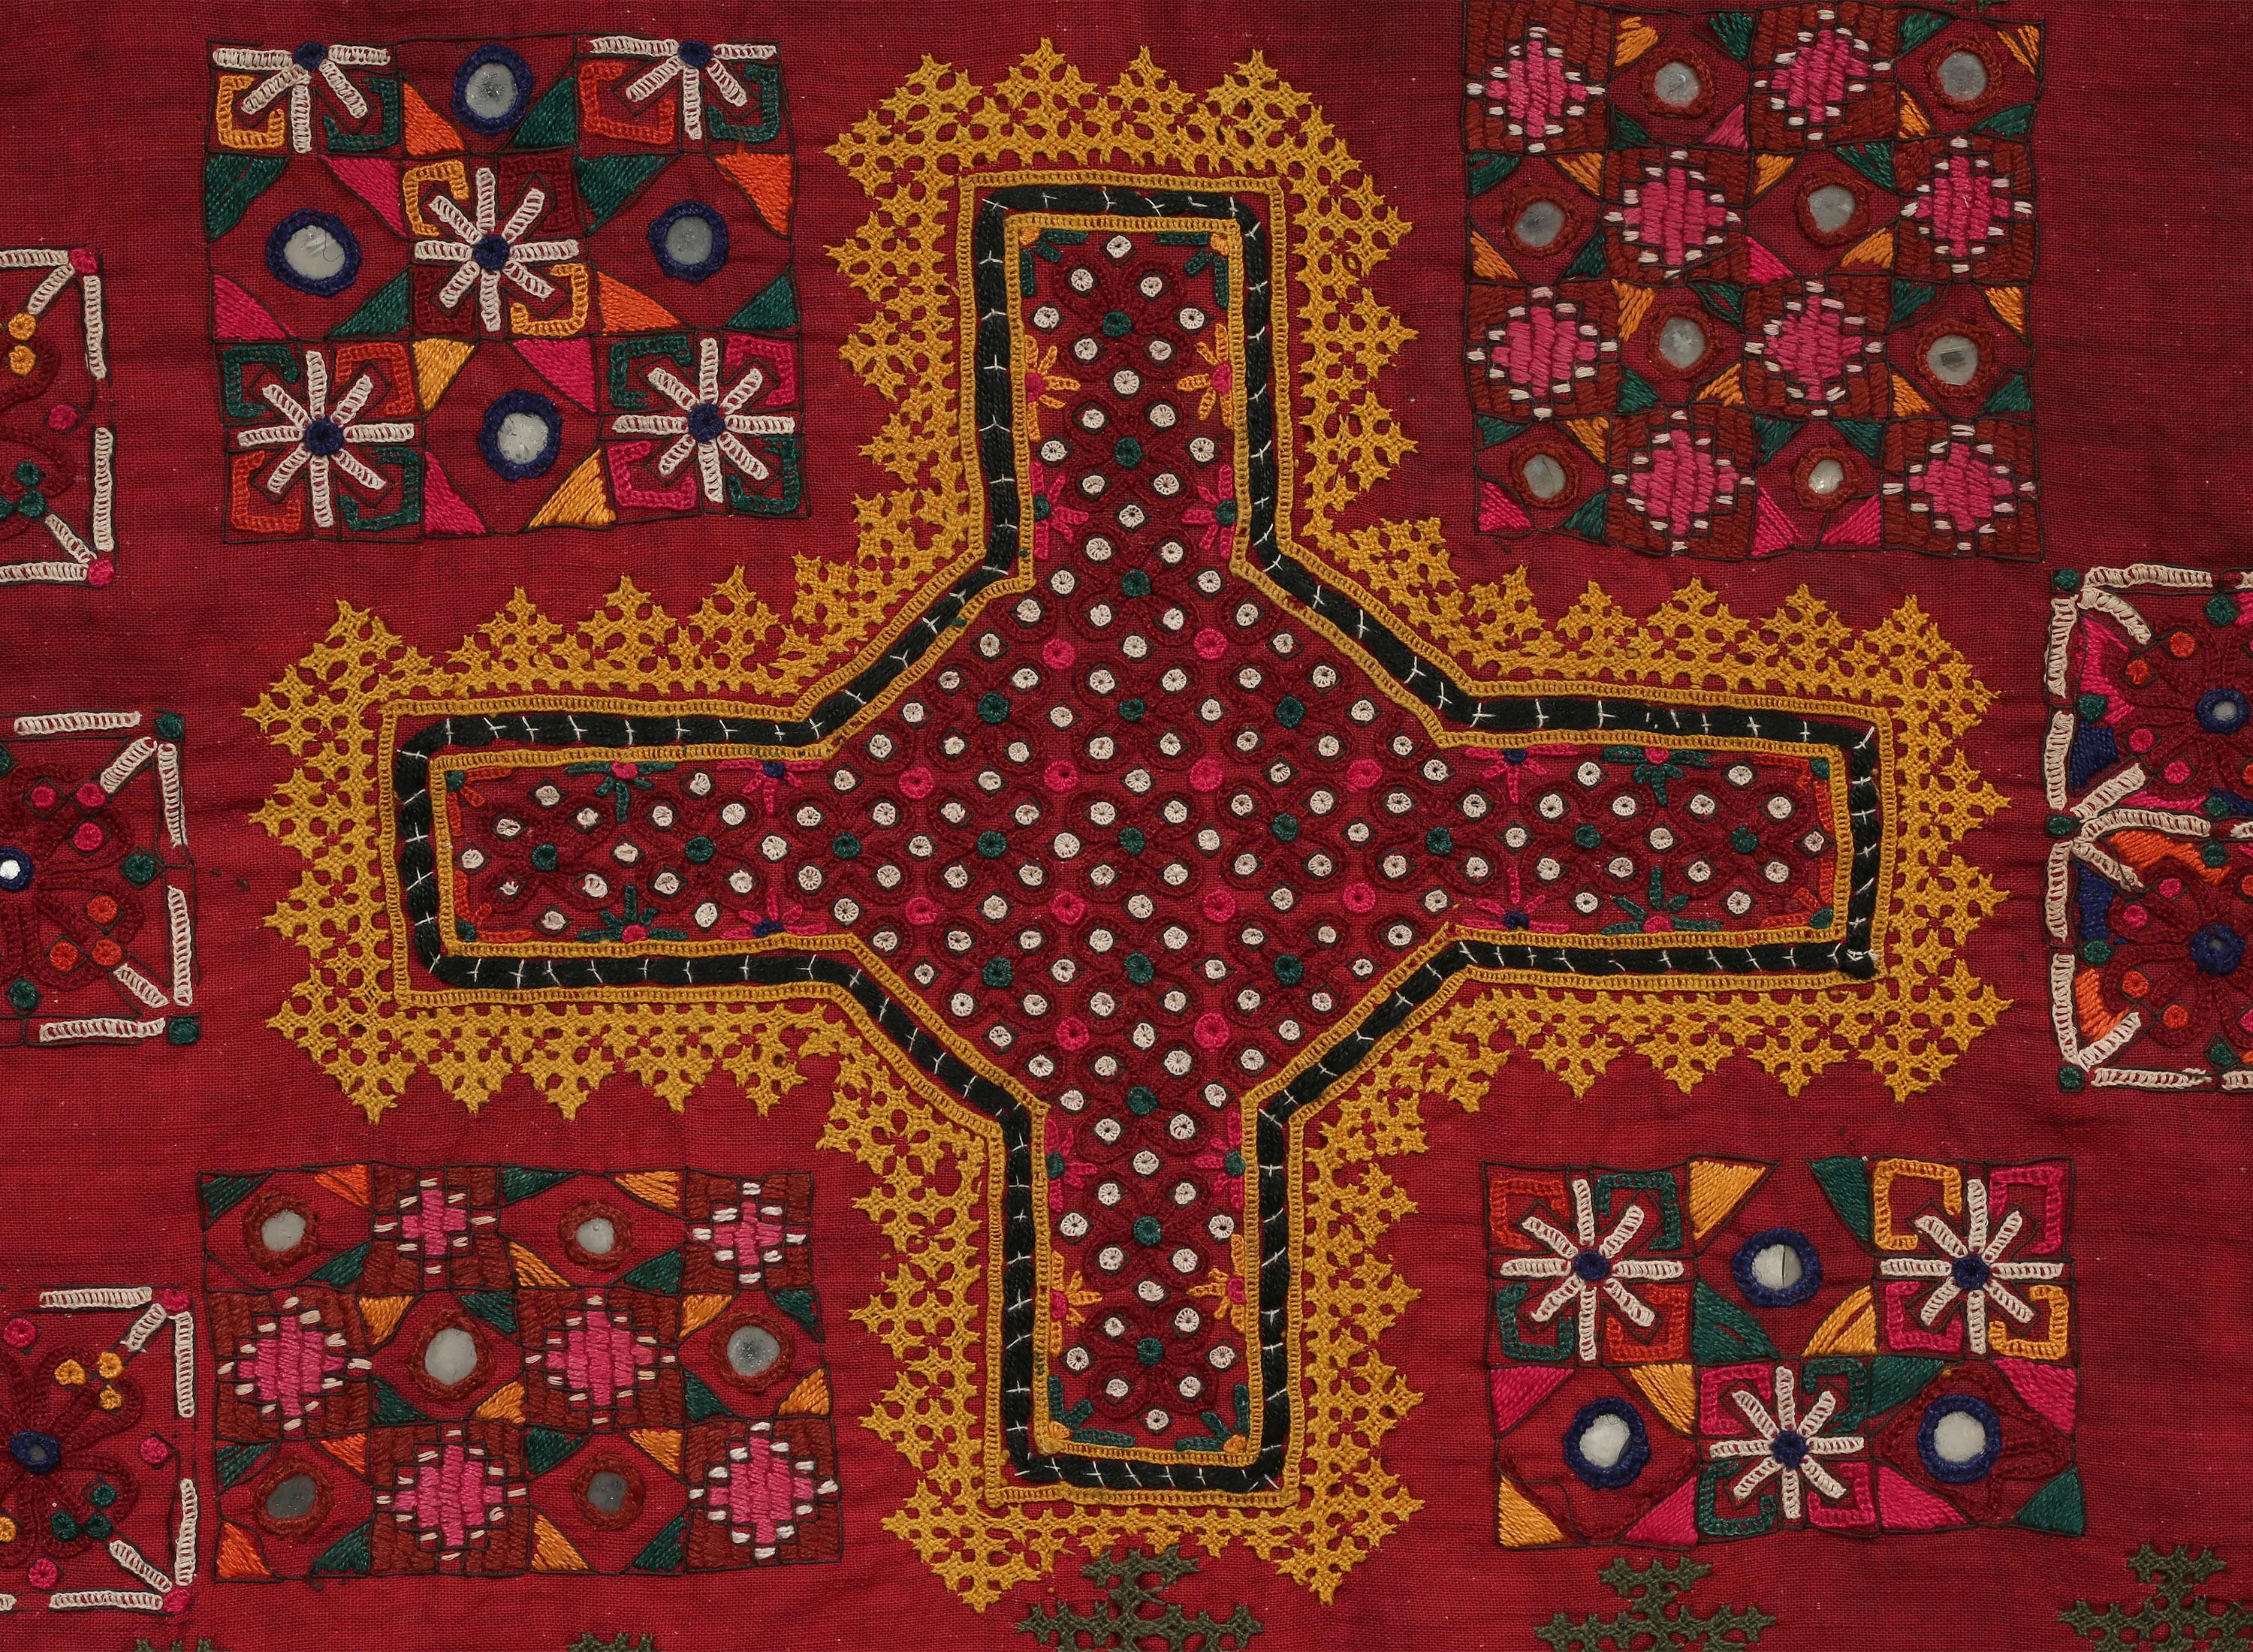 Embroidered Cradle cloth (Ghodiyu), Gujarat, India, circa 1900

This intricately embroidered cradle cloth features the Huramchi stitch (crochet-like) on hand-loomed cotton. Stylistic and design elements of this unique textile refer to the